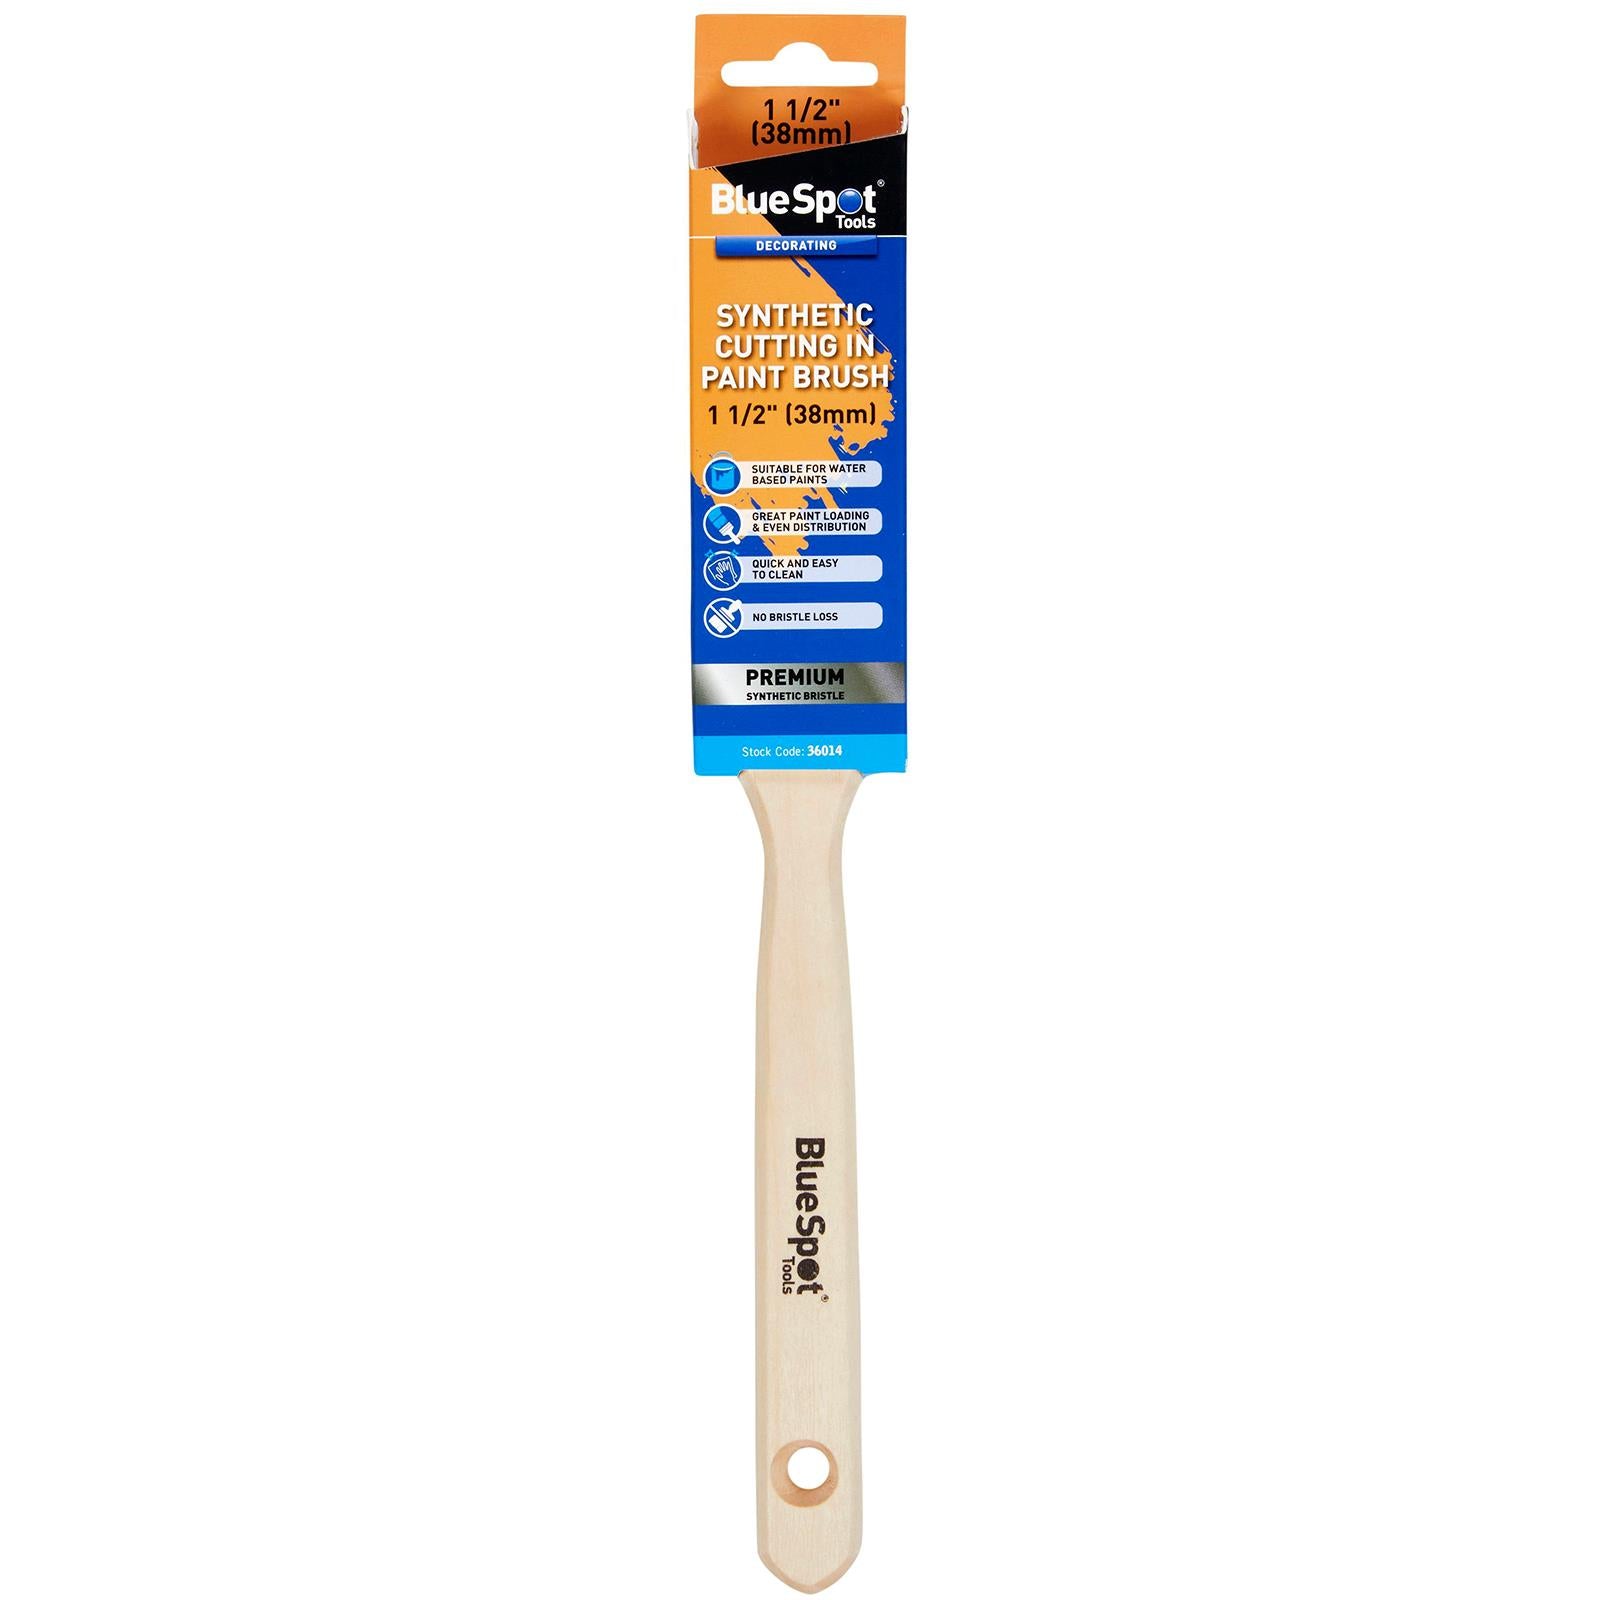 BlueSpot Synthetic Cutting In Paint Brush 1 1/2" (38mm)